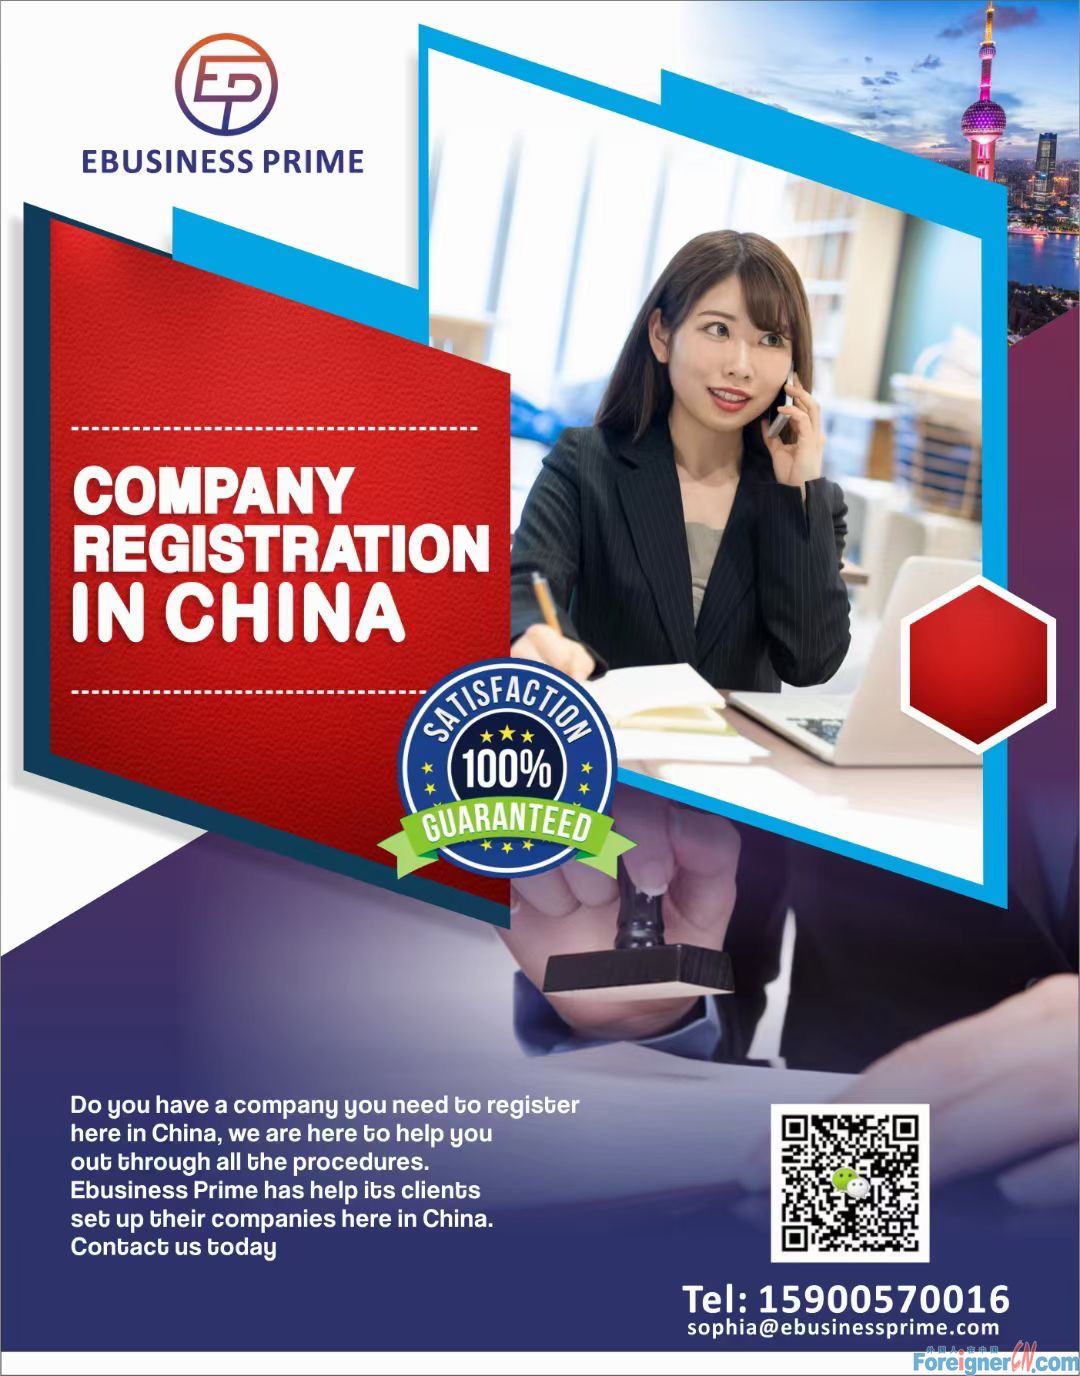 How To Register A Company In Shanghai?How can foreigners register a foreign companies in Shanghai,How to register Foreign Company in Shanghai,Register company in Shanghai China/Set up company in Shanghai,How much does it cost to register a company.